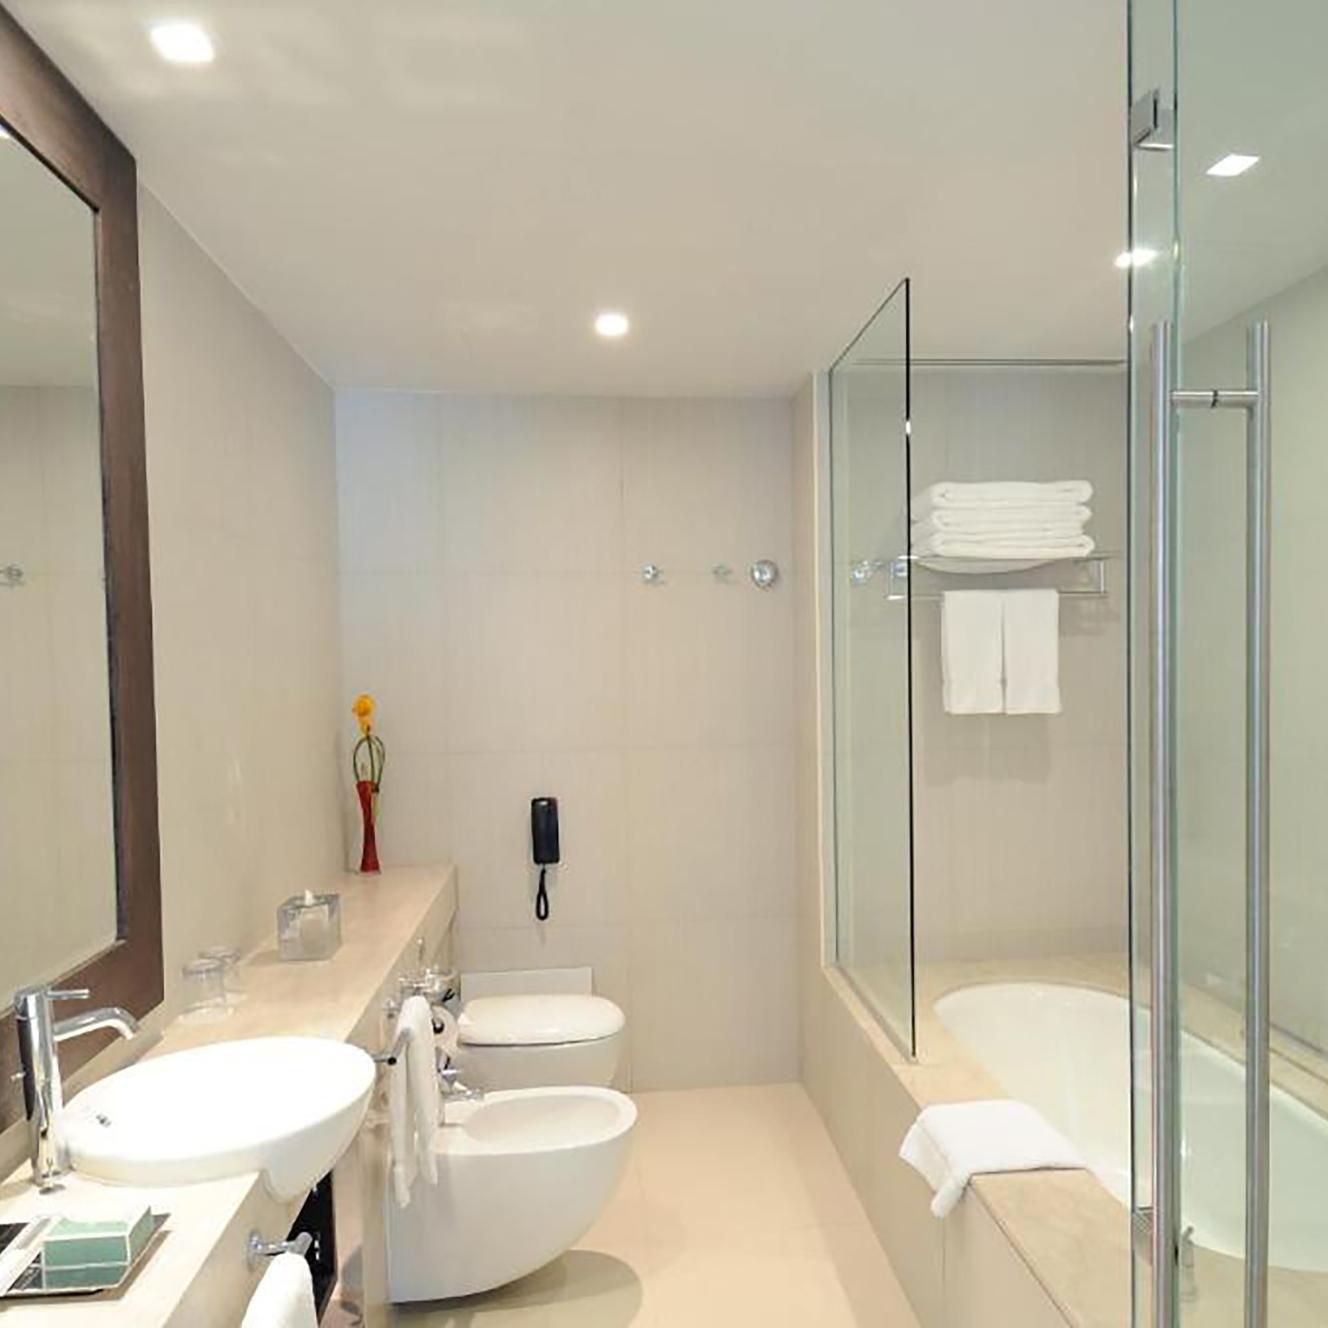 Clean and complete bathroom amenities for your comfort